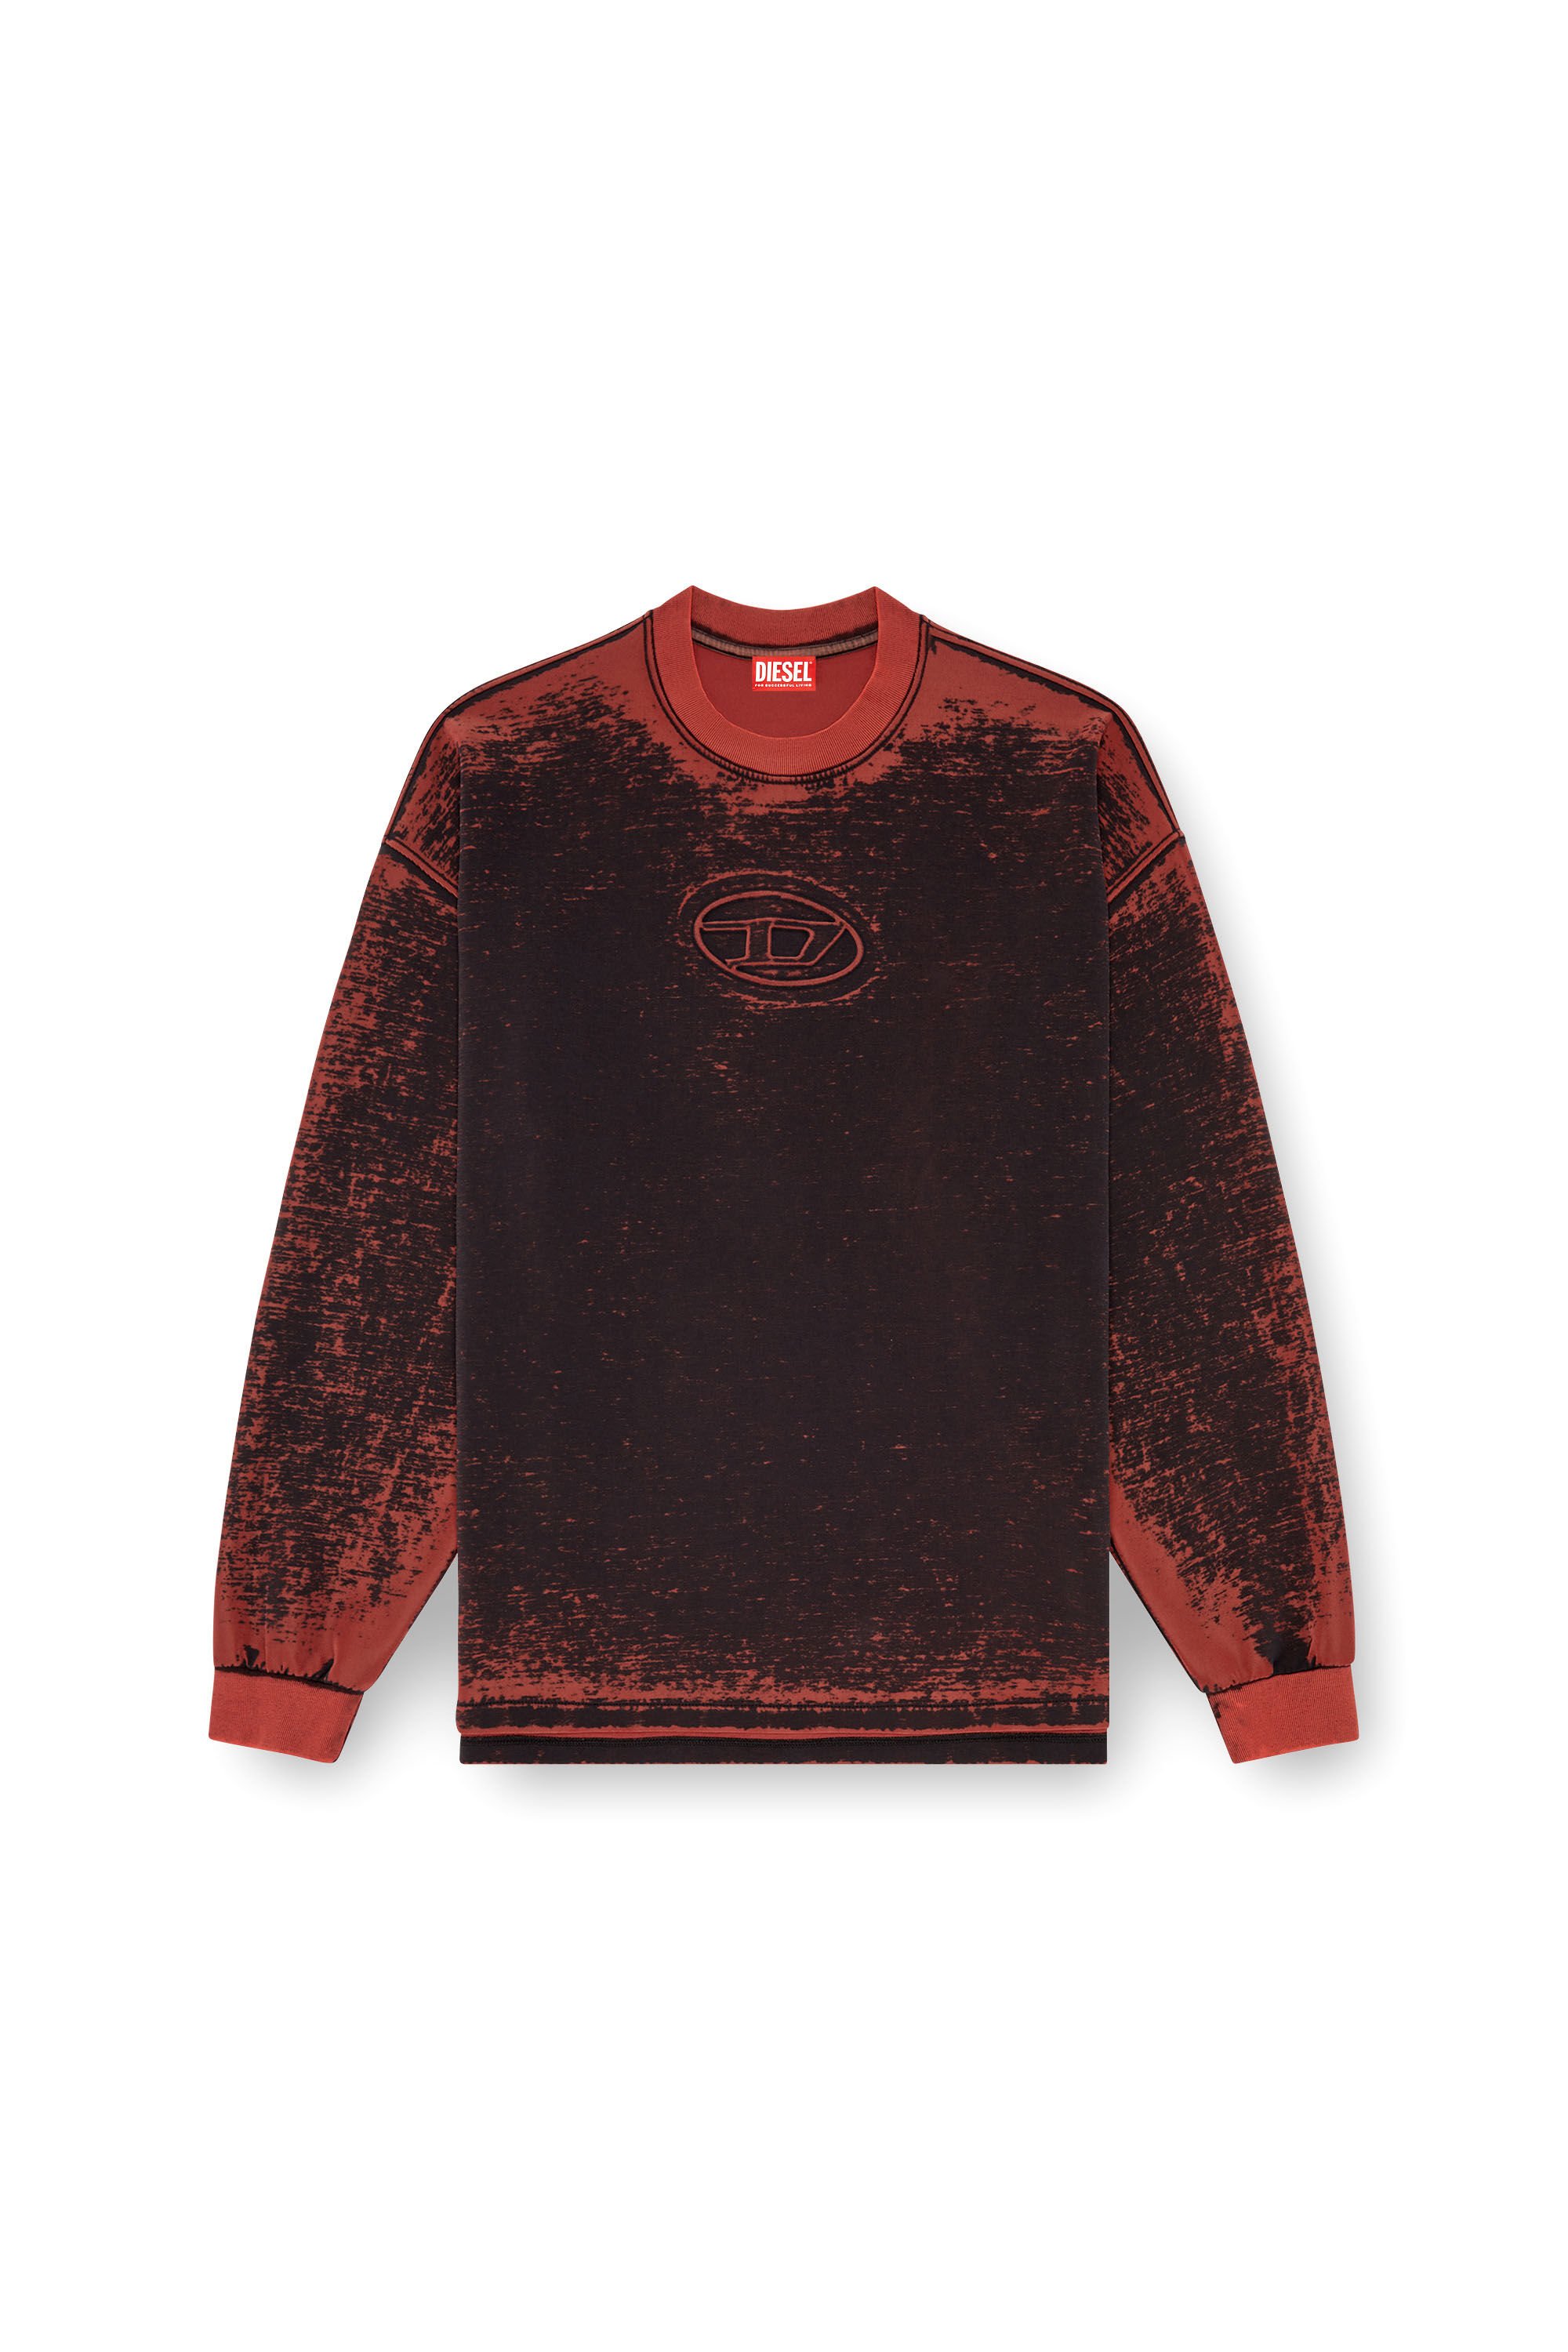 Diesel - S-BAXT-Q1, Man Burnout sweatshirt with embossed Oval D in Red - Image 2